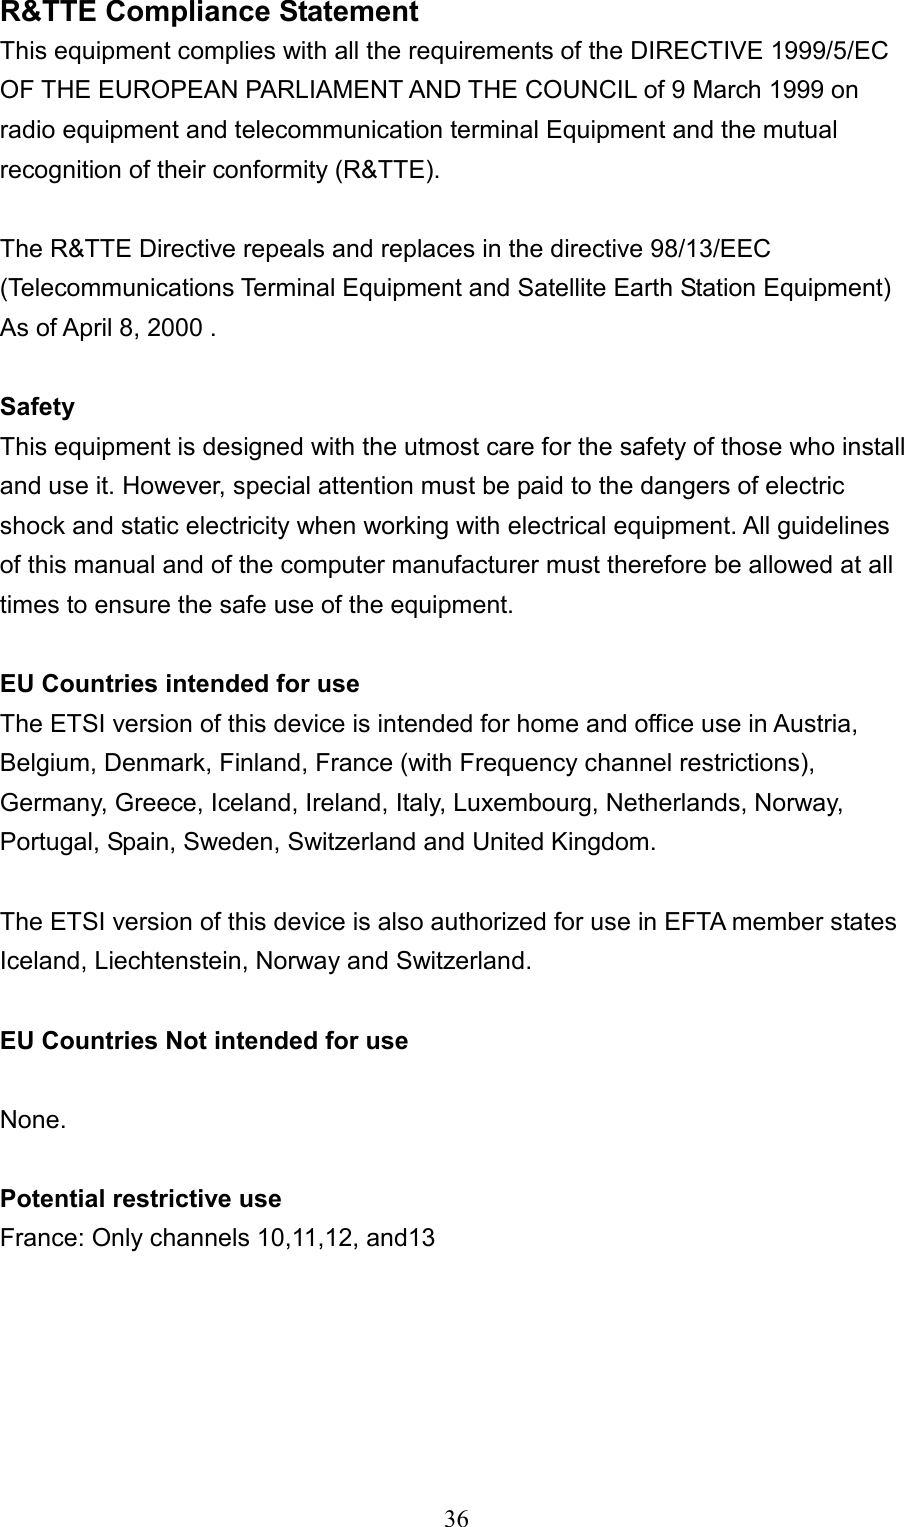  36R&amp;TTE Compliance Statement This equipment complies with all the requirements of the DIRECTIVE 1999/5/EC OF THE EUROPEAN PARLIAMENT AND THE COUNCIL of 9 March 1999 on radio equipment and telecommunication terminal Equipment and the mutual recognition of their conformity (R&amp;TTE).  The R&amp;TTE Directive repeals and replaces in the directive 98/13/EEC (Telecommunications Terminal Equipment and Satellite Earth Station Equipment) As of April 8, 2000 .  Safety This equipment is designed with the utmost care for the safety of those who install and use it. However, special attention must be paid to the dangers of electric shock and static electricity when working with electrical equipment. All guidelines of this manual and of the computer manufacturer must therefore be allowed at all times to ensure the safe use of the equipment.  EU Countries intended for use The ETSI version of this device is intended for home and office use in Austria, Belgium, Denmark, Finland, France (with Frequency channel restrictions), Germany, Greece, Iceland, Ireland, Italy, Luxembourg, Netherlands, Norway, Portugal, Spain, Sweden, Switzerland and United Kingdom.  The ETSI version of this device is also authorized for use in EFTA member states Iceland, Liechtenstein, Norway and Switzerland.  EU Countries Not intended for use  None.  Potential restrictive use France: Only channels 10,11,12, and13       